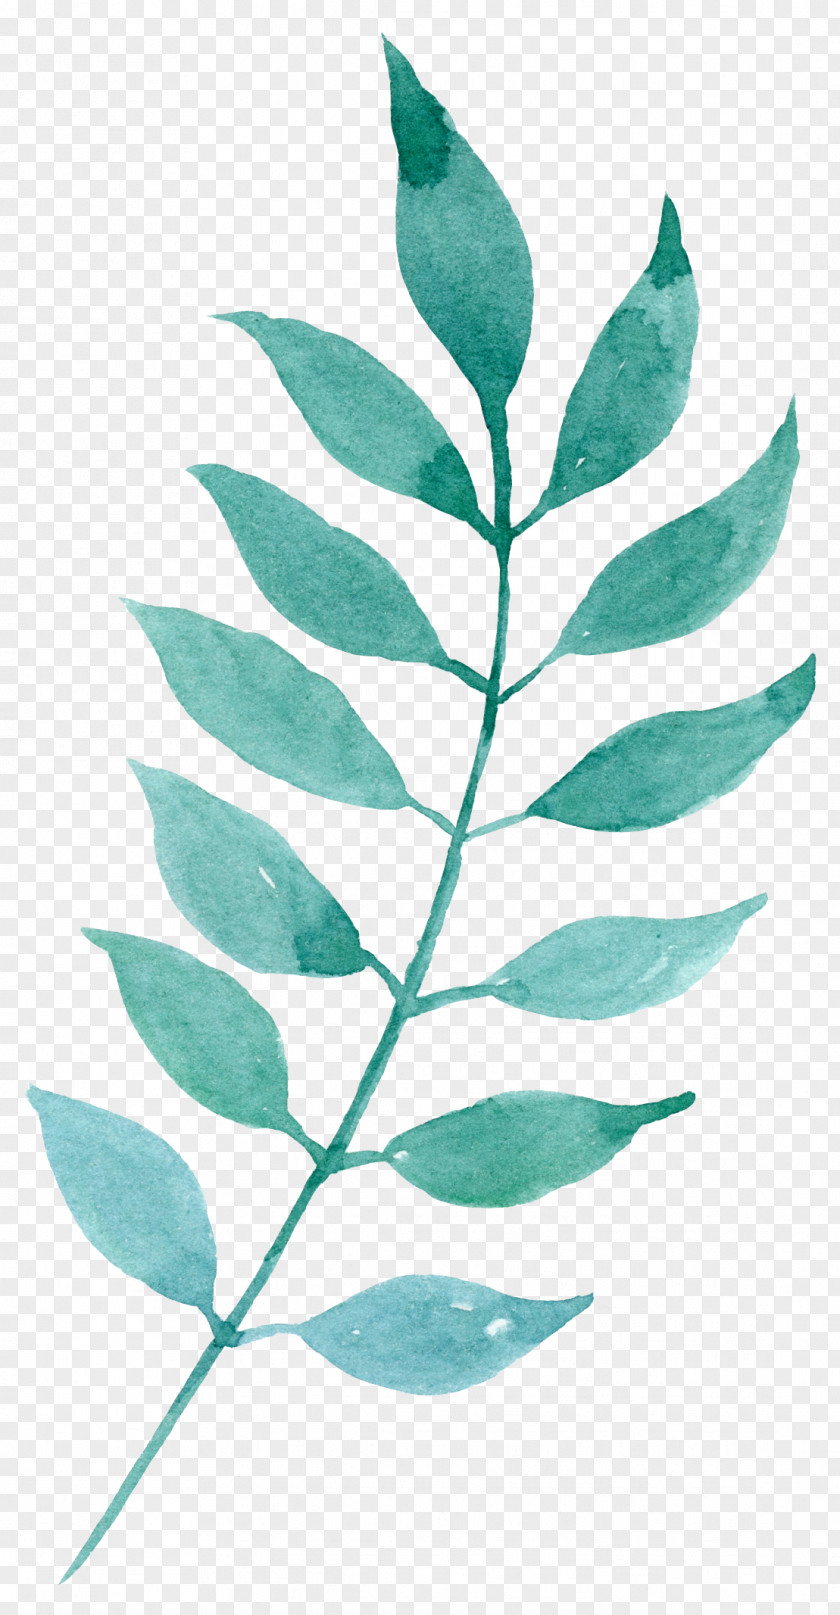 Hand-painted Mint Green Leaves Watercolor Painting Download Leaf PNG